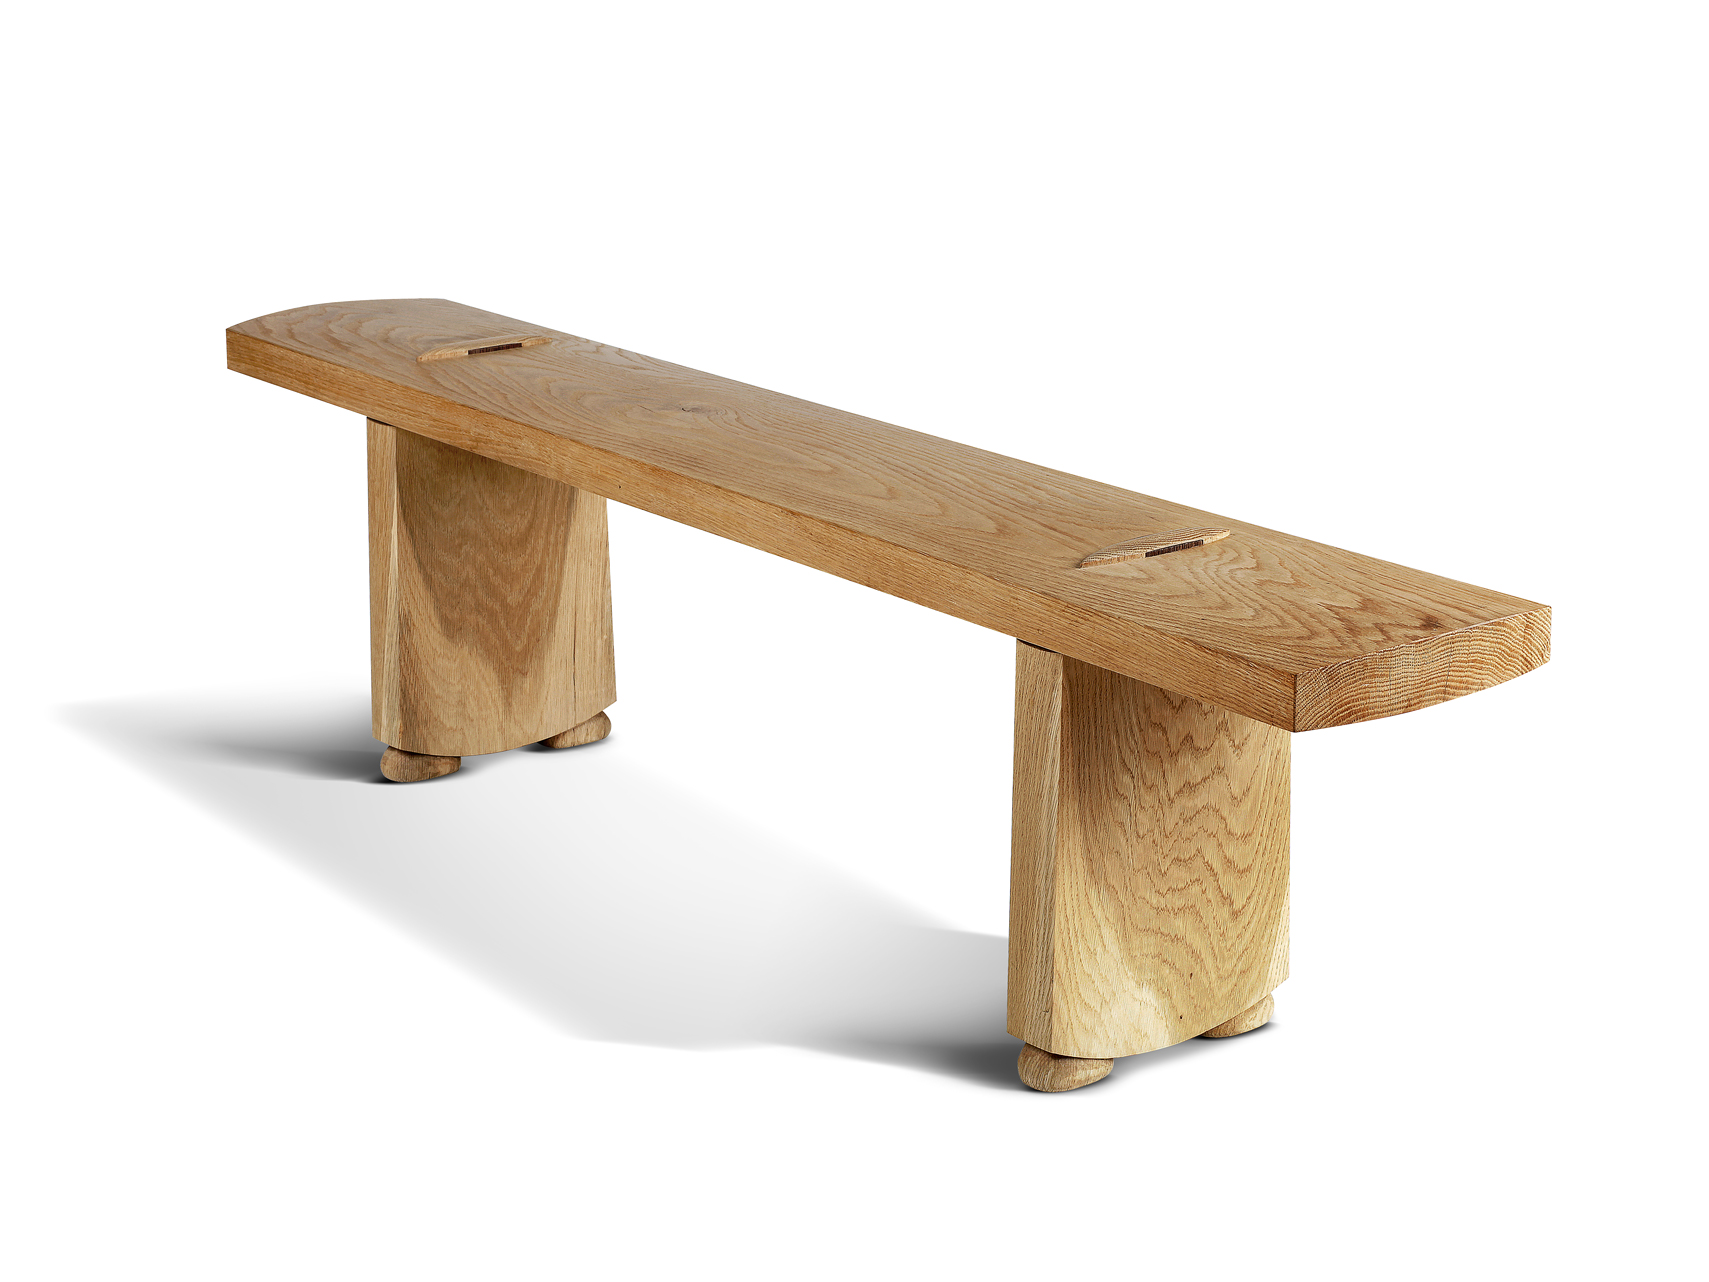 ar and dee design build white oak bench